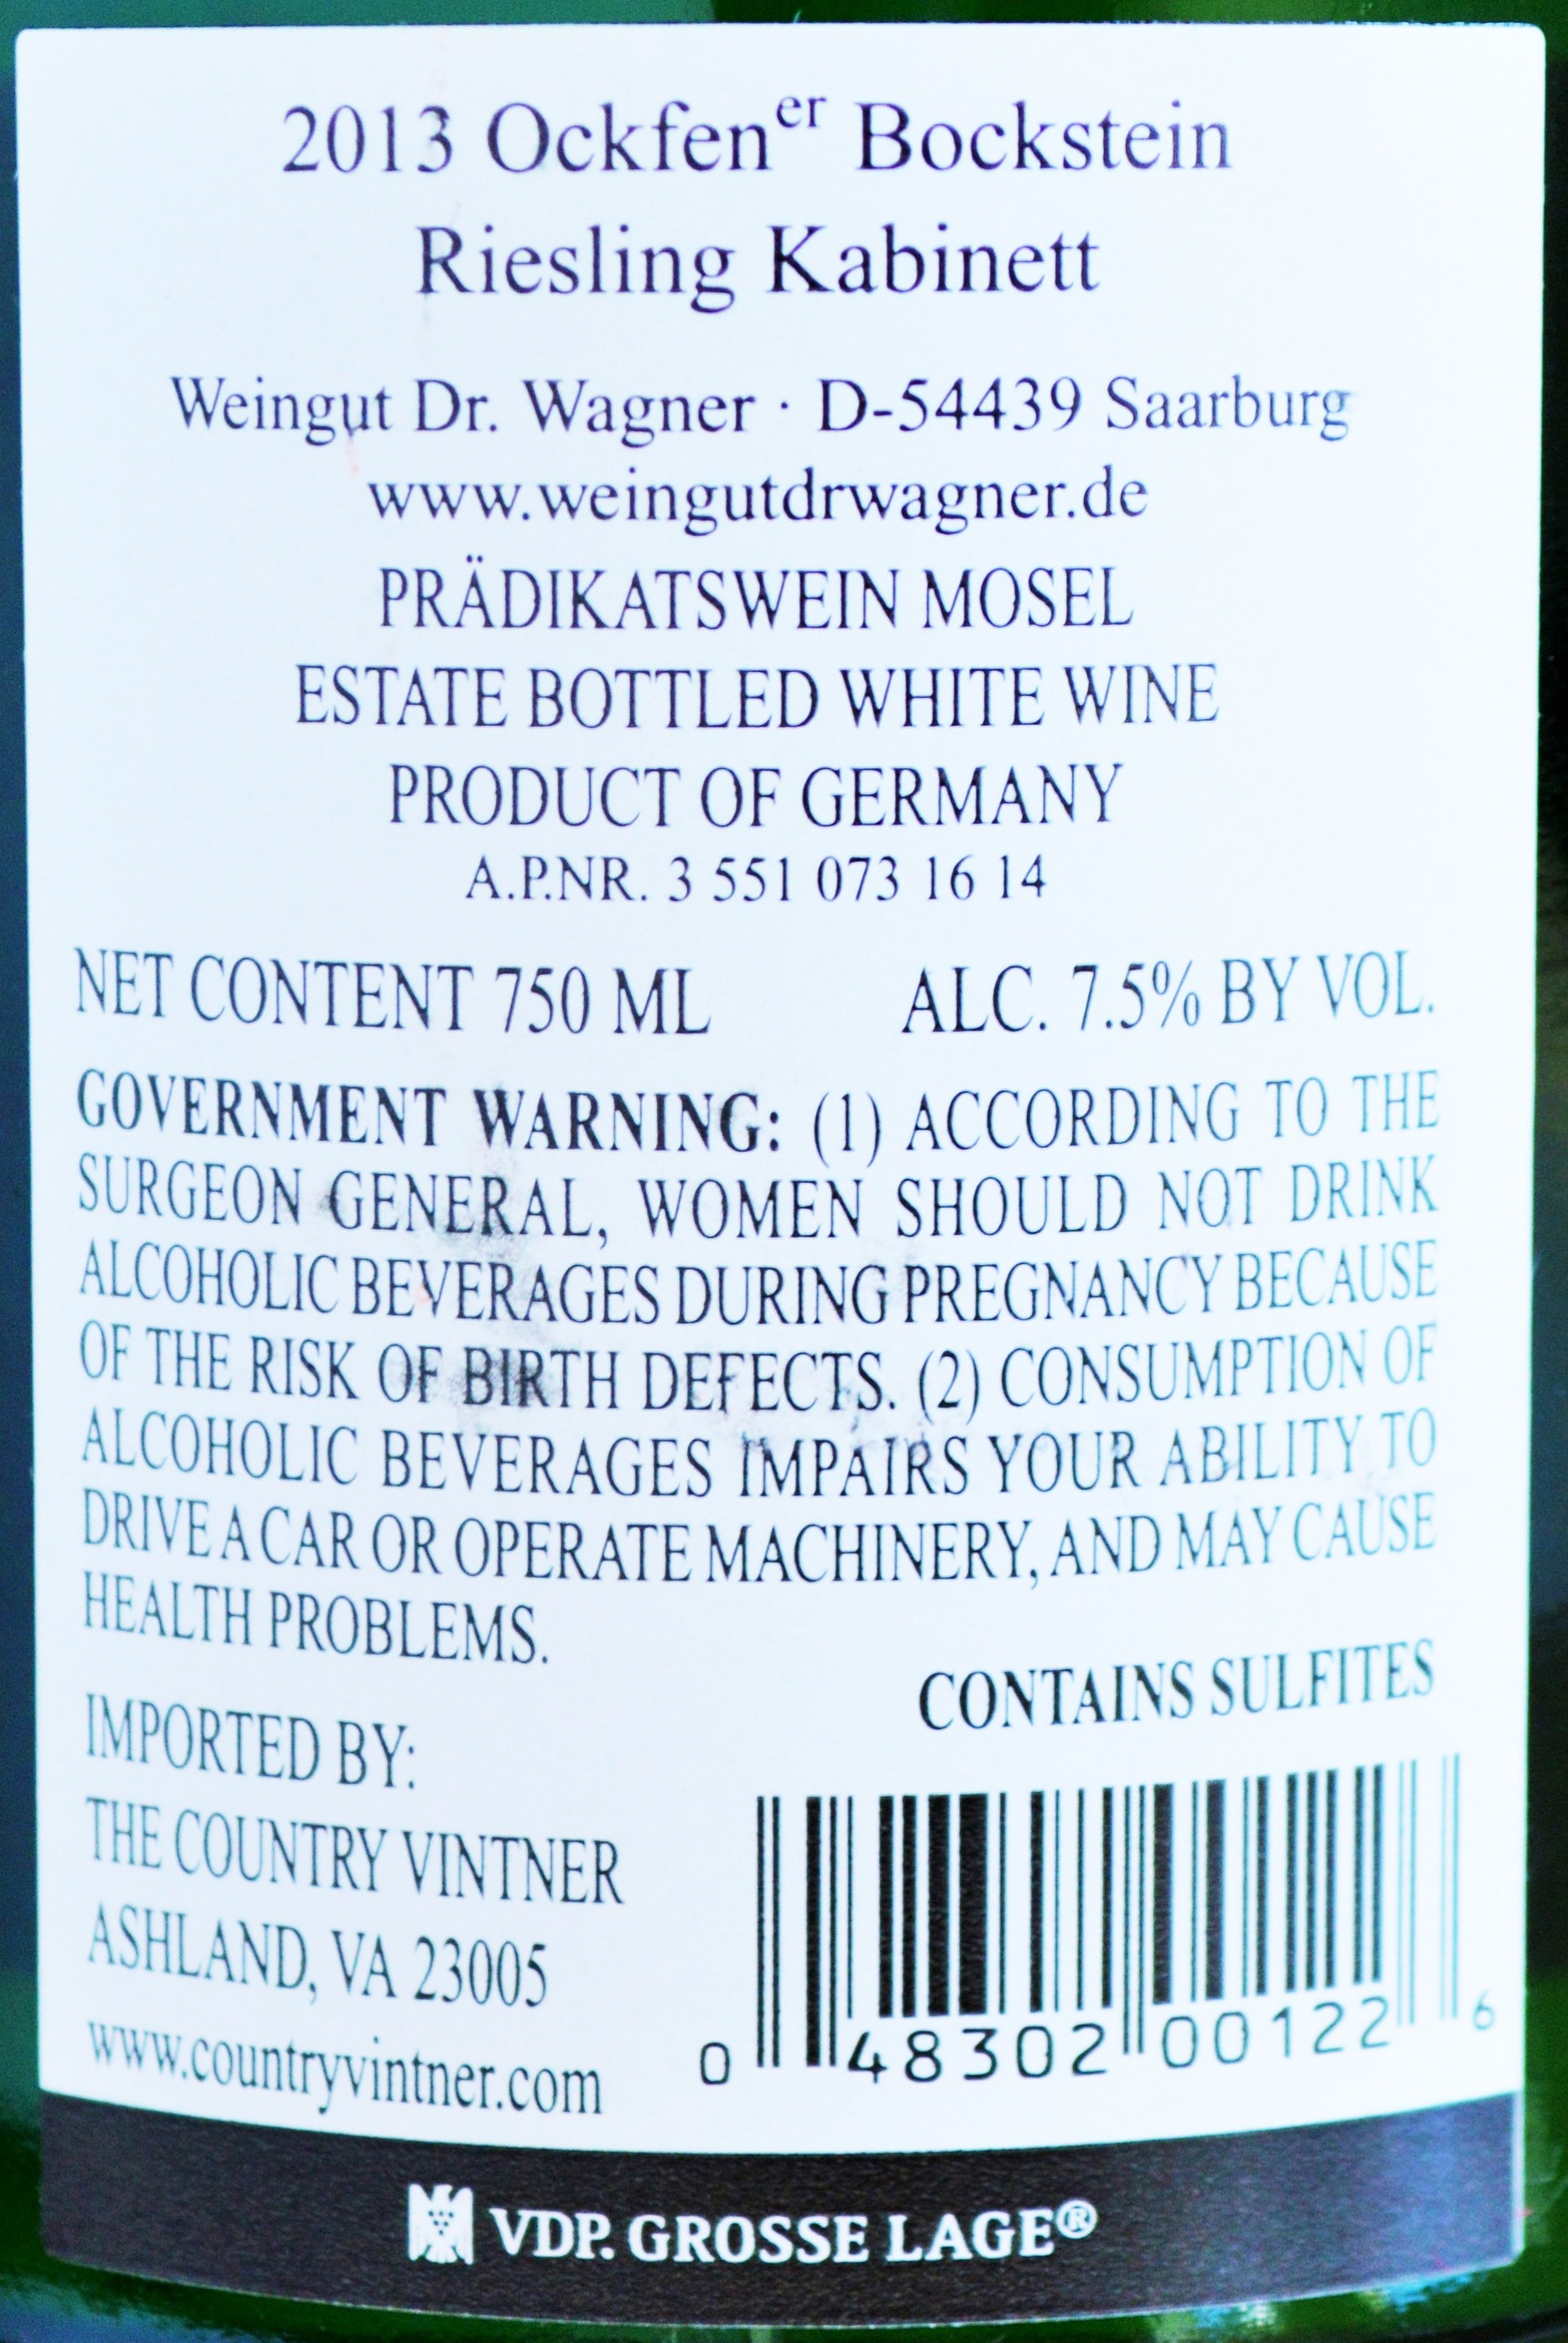 Dr. Riesling Kabinett Review